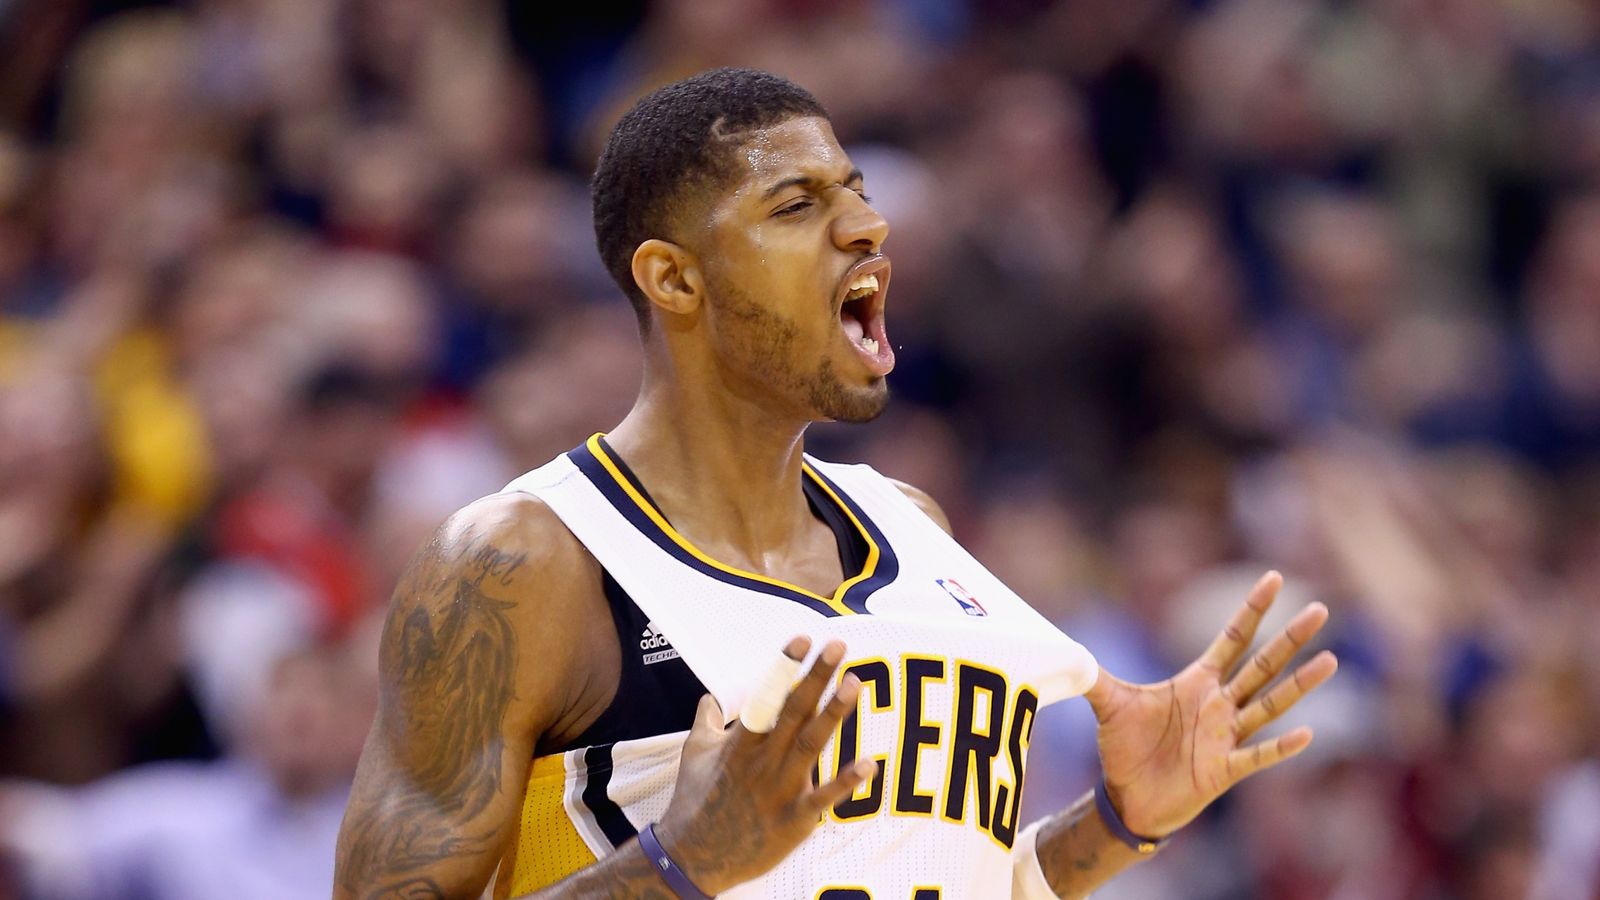 Paul George leads as Indiana Pacers hold off New Orleans Pelicans 